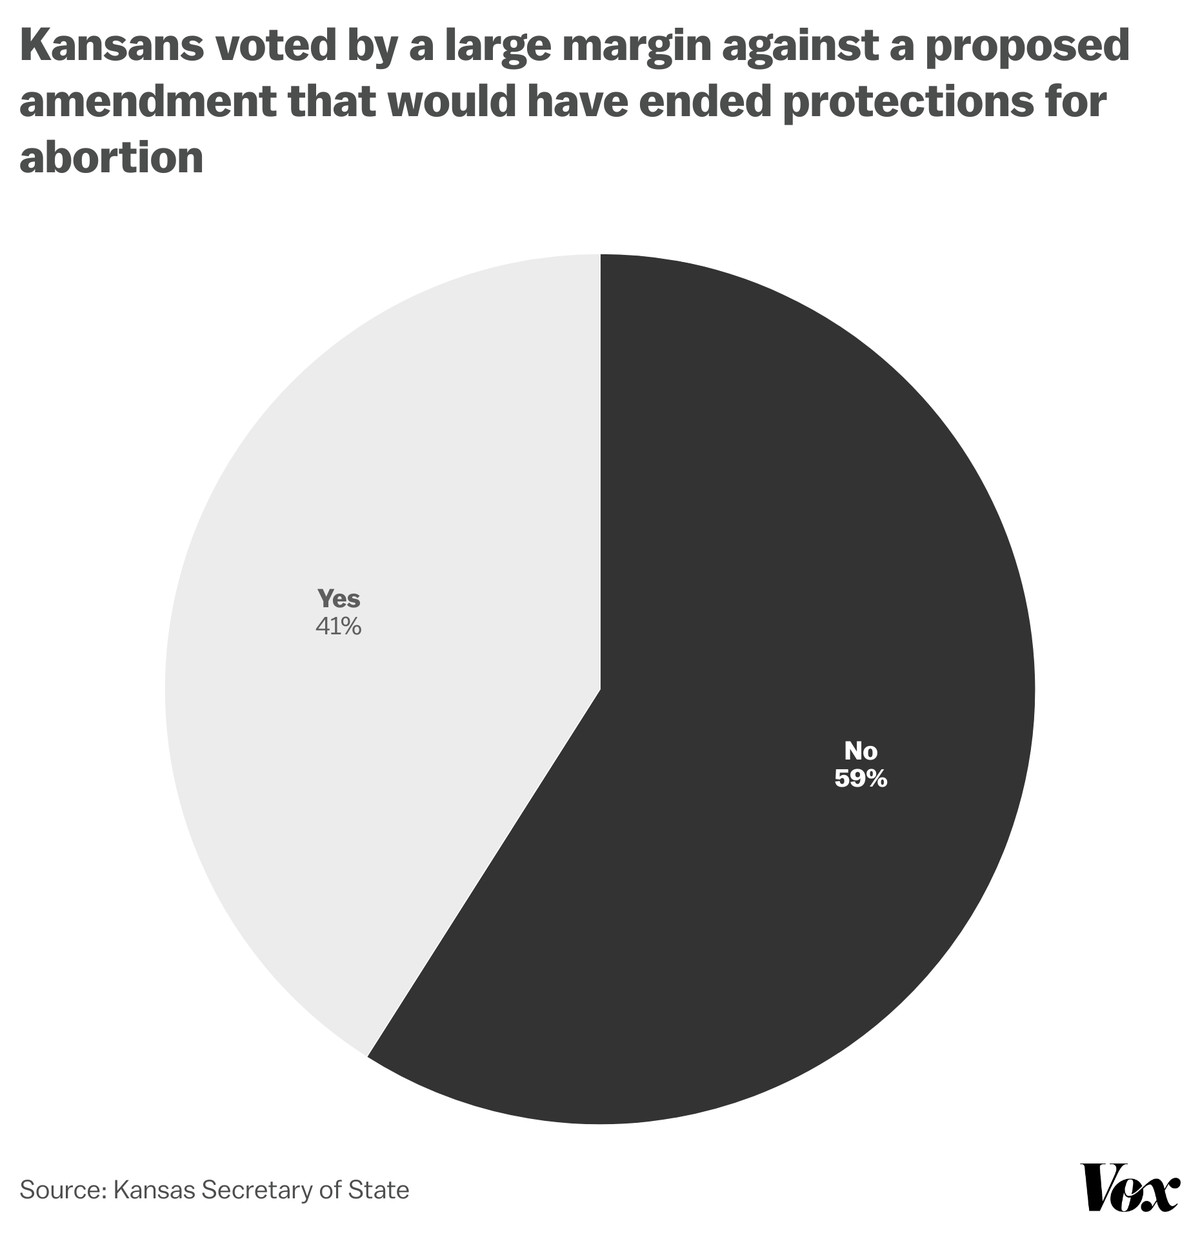 Kansans voted by a large margin (59% no, 41% yes) against a proposed amendment that would have ended protections for abortion.